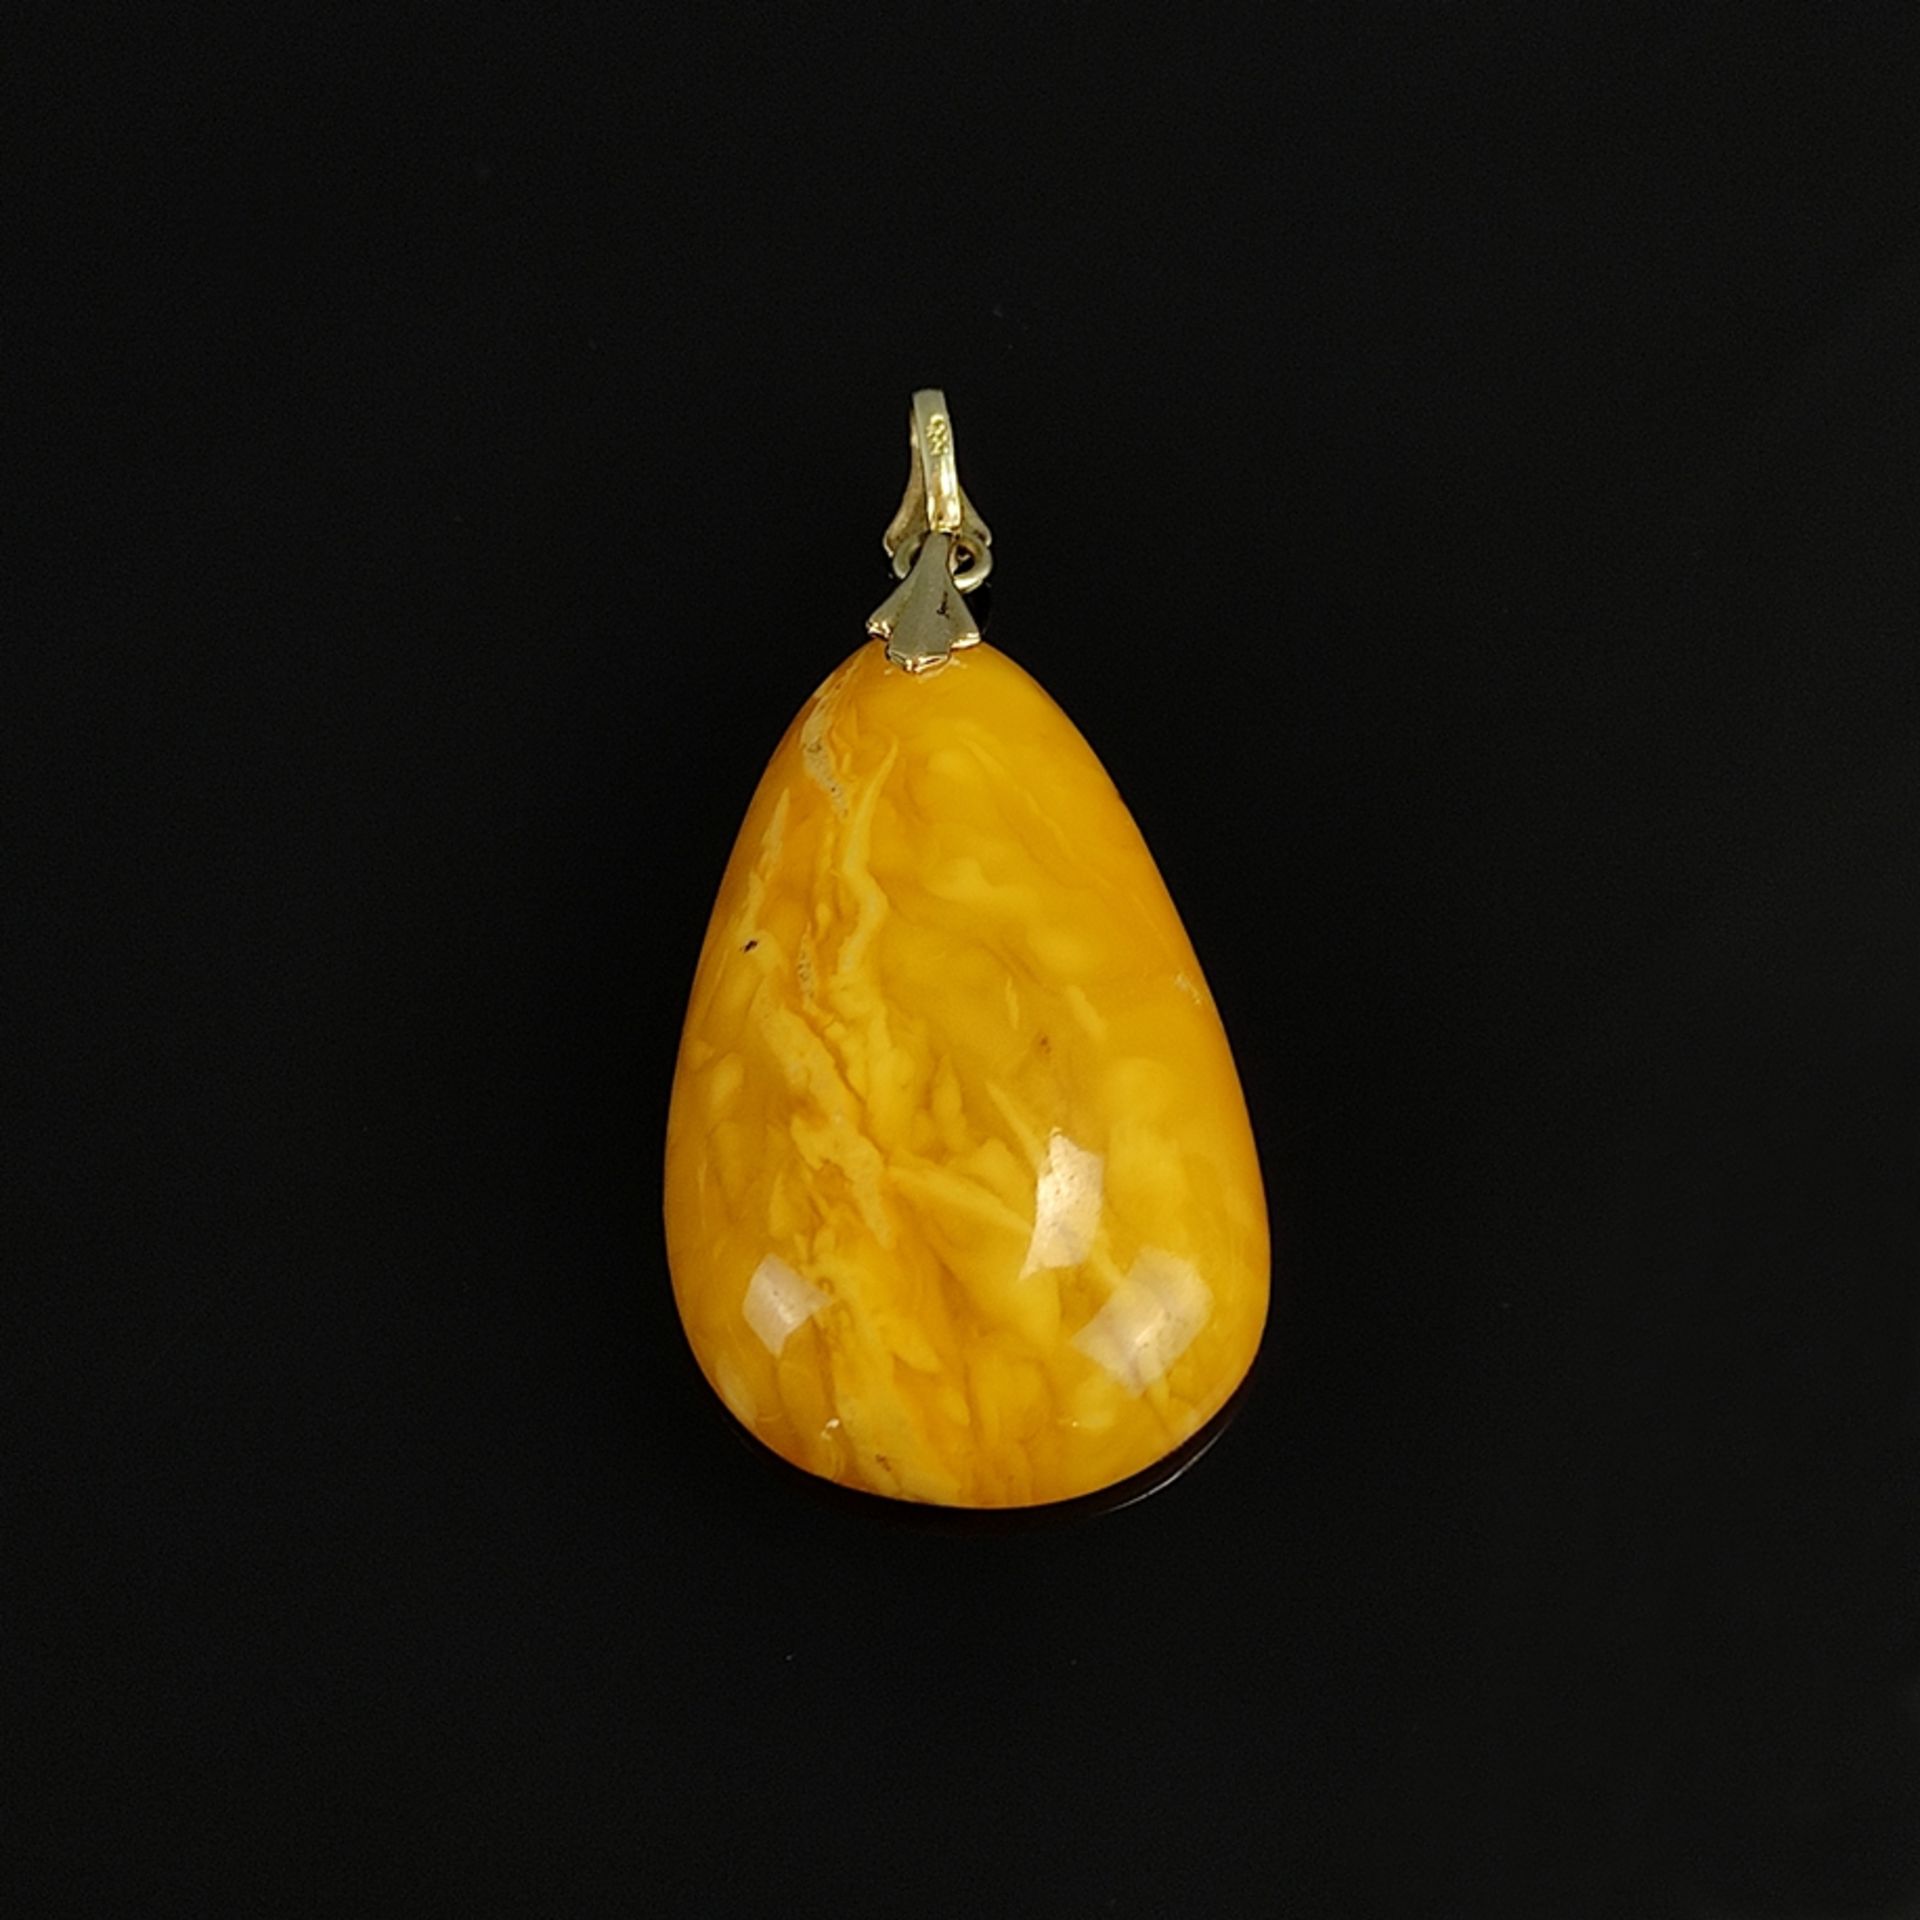 Amber pendant, 585/14K yellow gold, total weight 5.47g, teardrop shaped amber, worked flat on the r